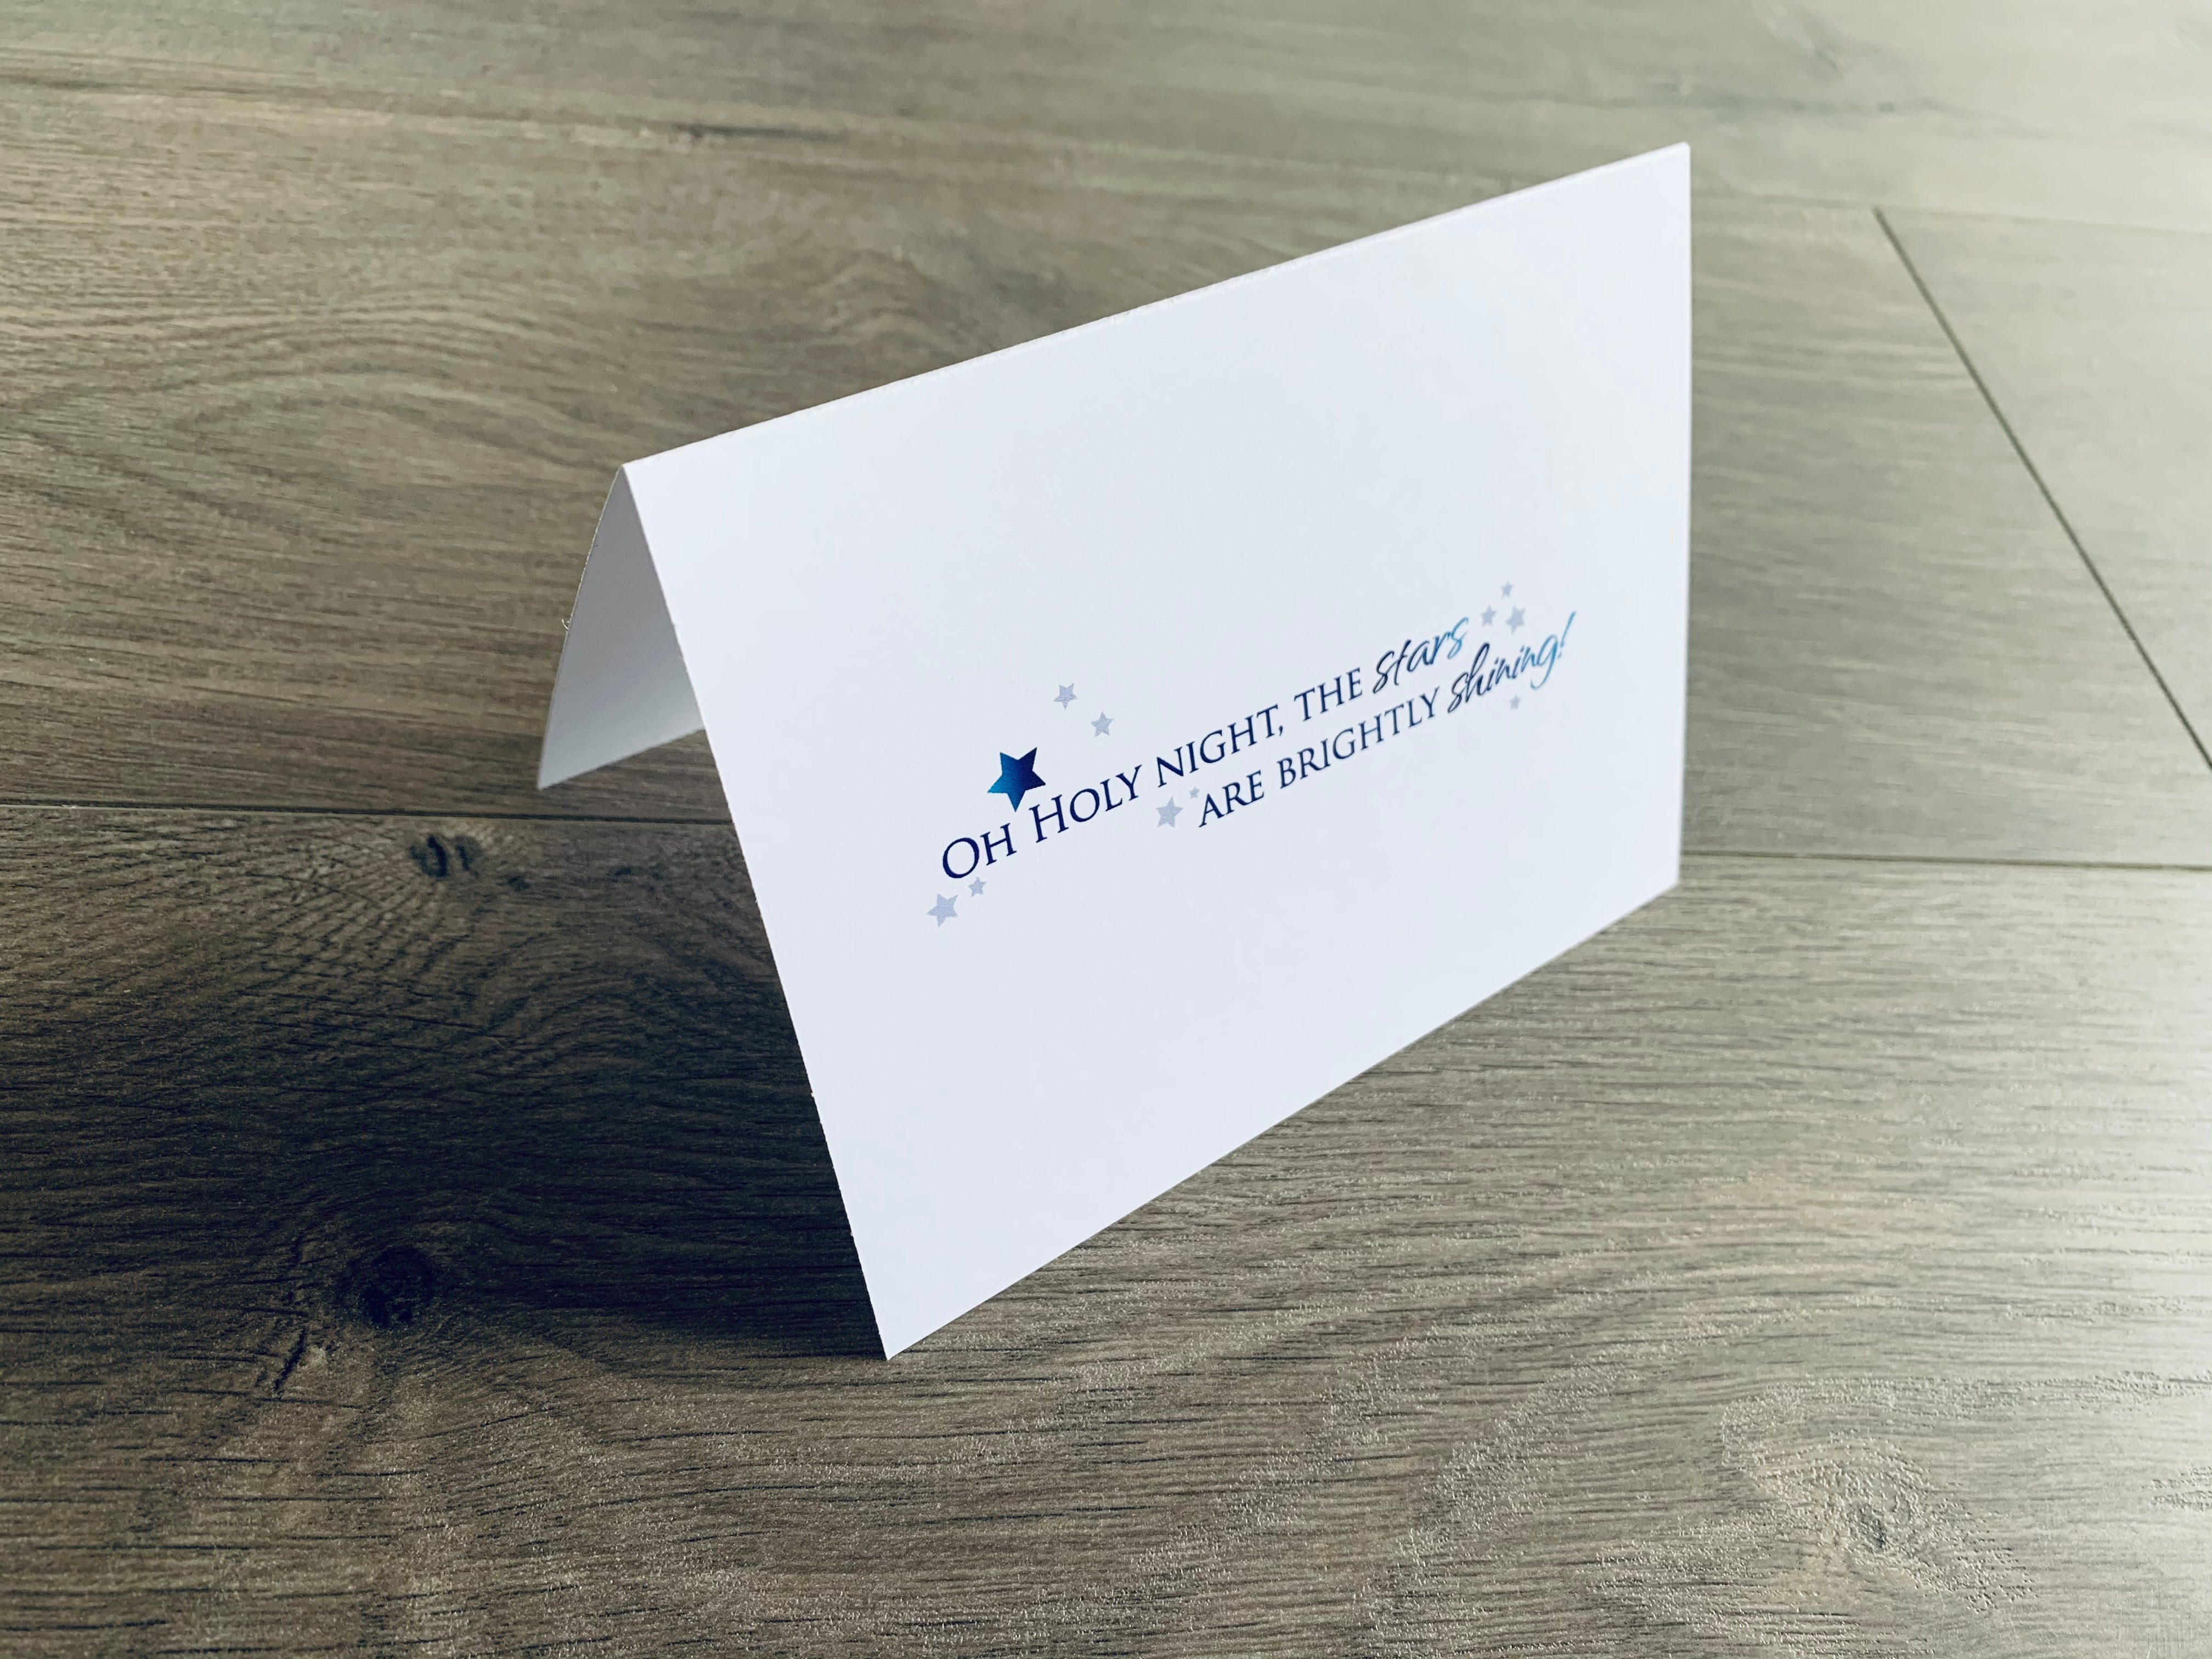 A white, folded notecard sits on a wooden floor. The card says, "Oh holy night, the stars are brightly shining" with small blue stars around the saying. Christmas Magic collection by Stationare.